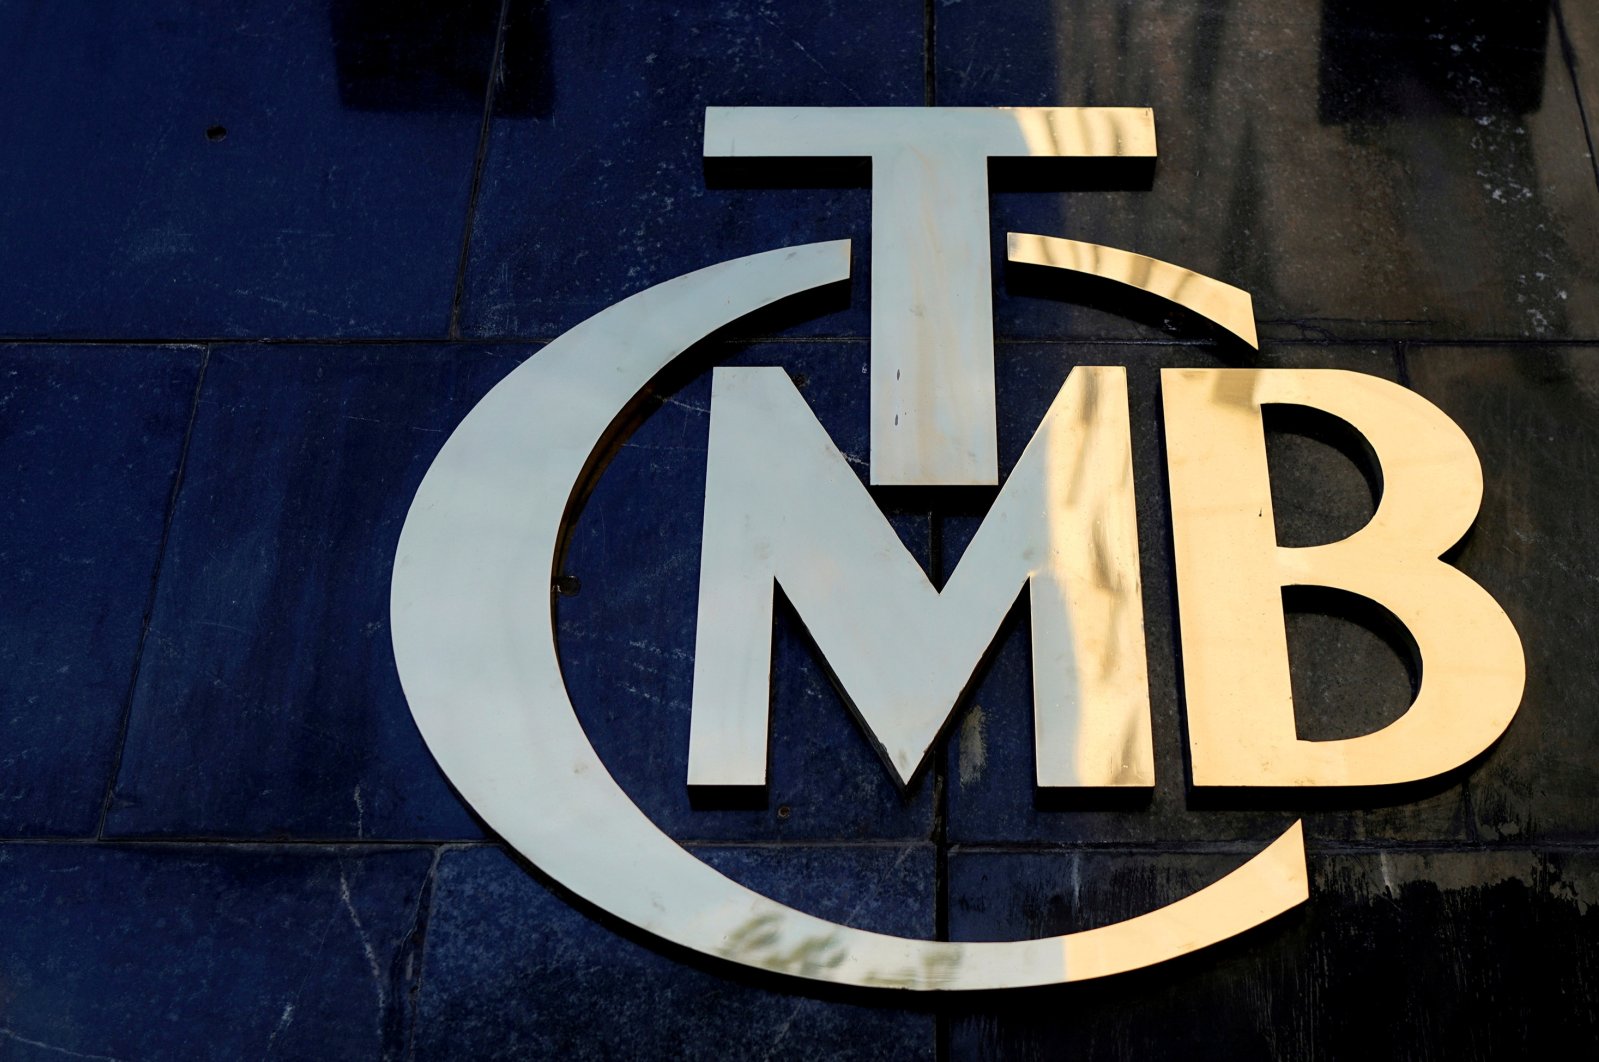 A logo of the CBRT is pictured at the entrance of the bank's headquarters in Ankara, Turkey,  April 19, 2015. (Reuters Photo)